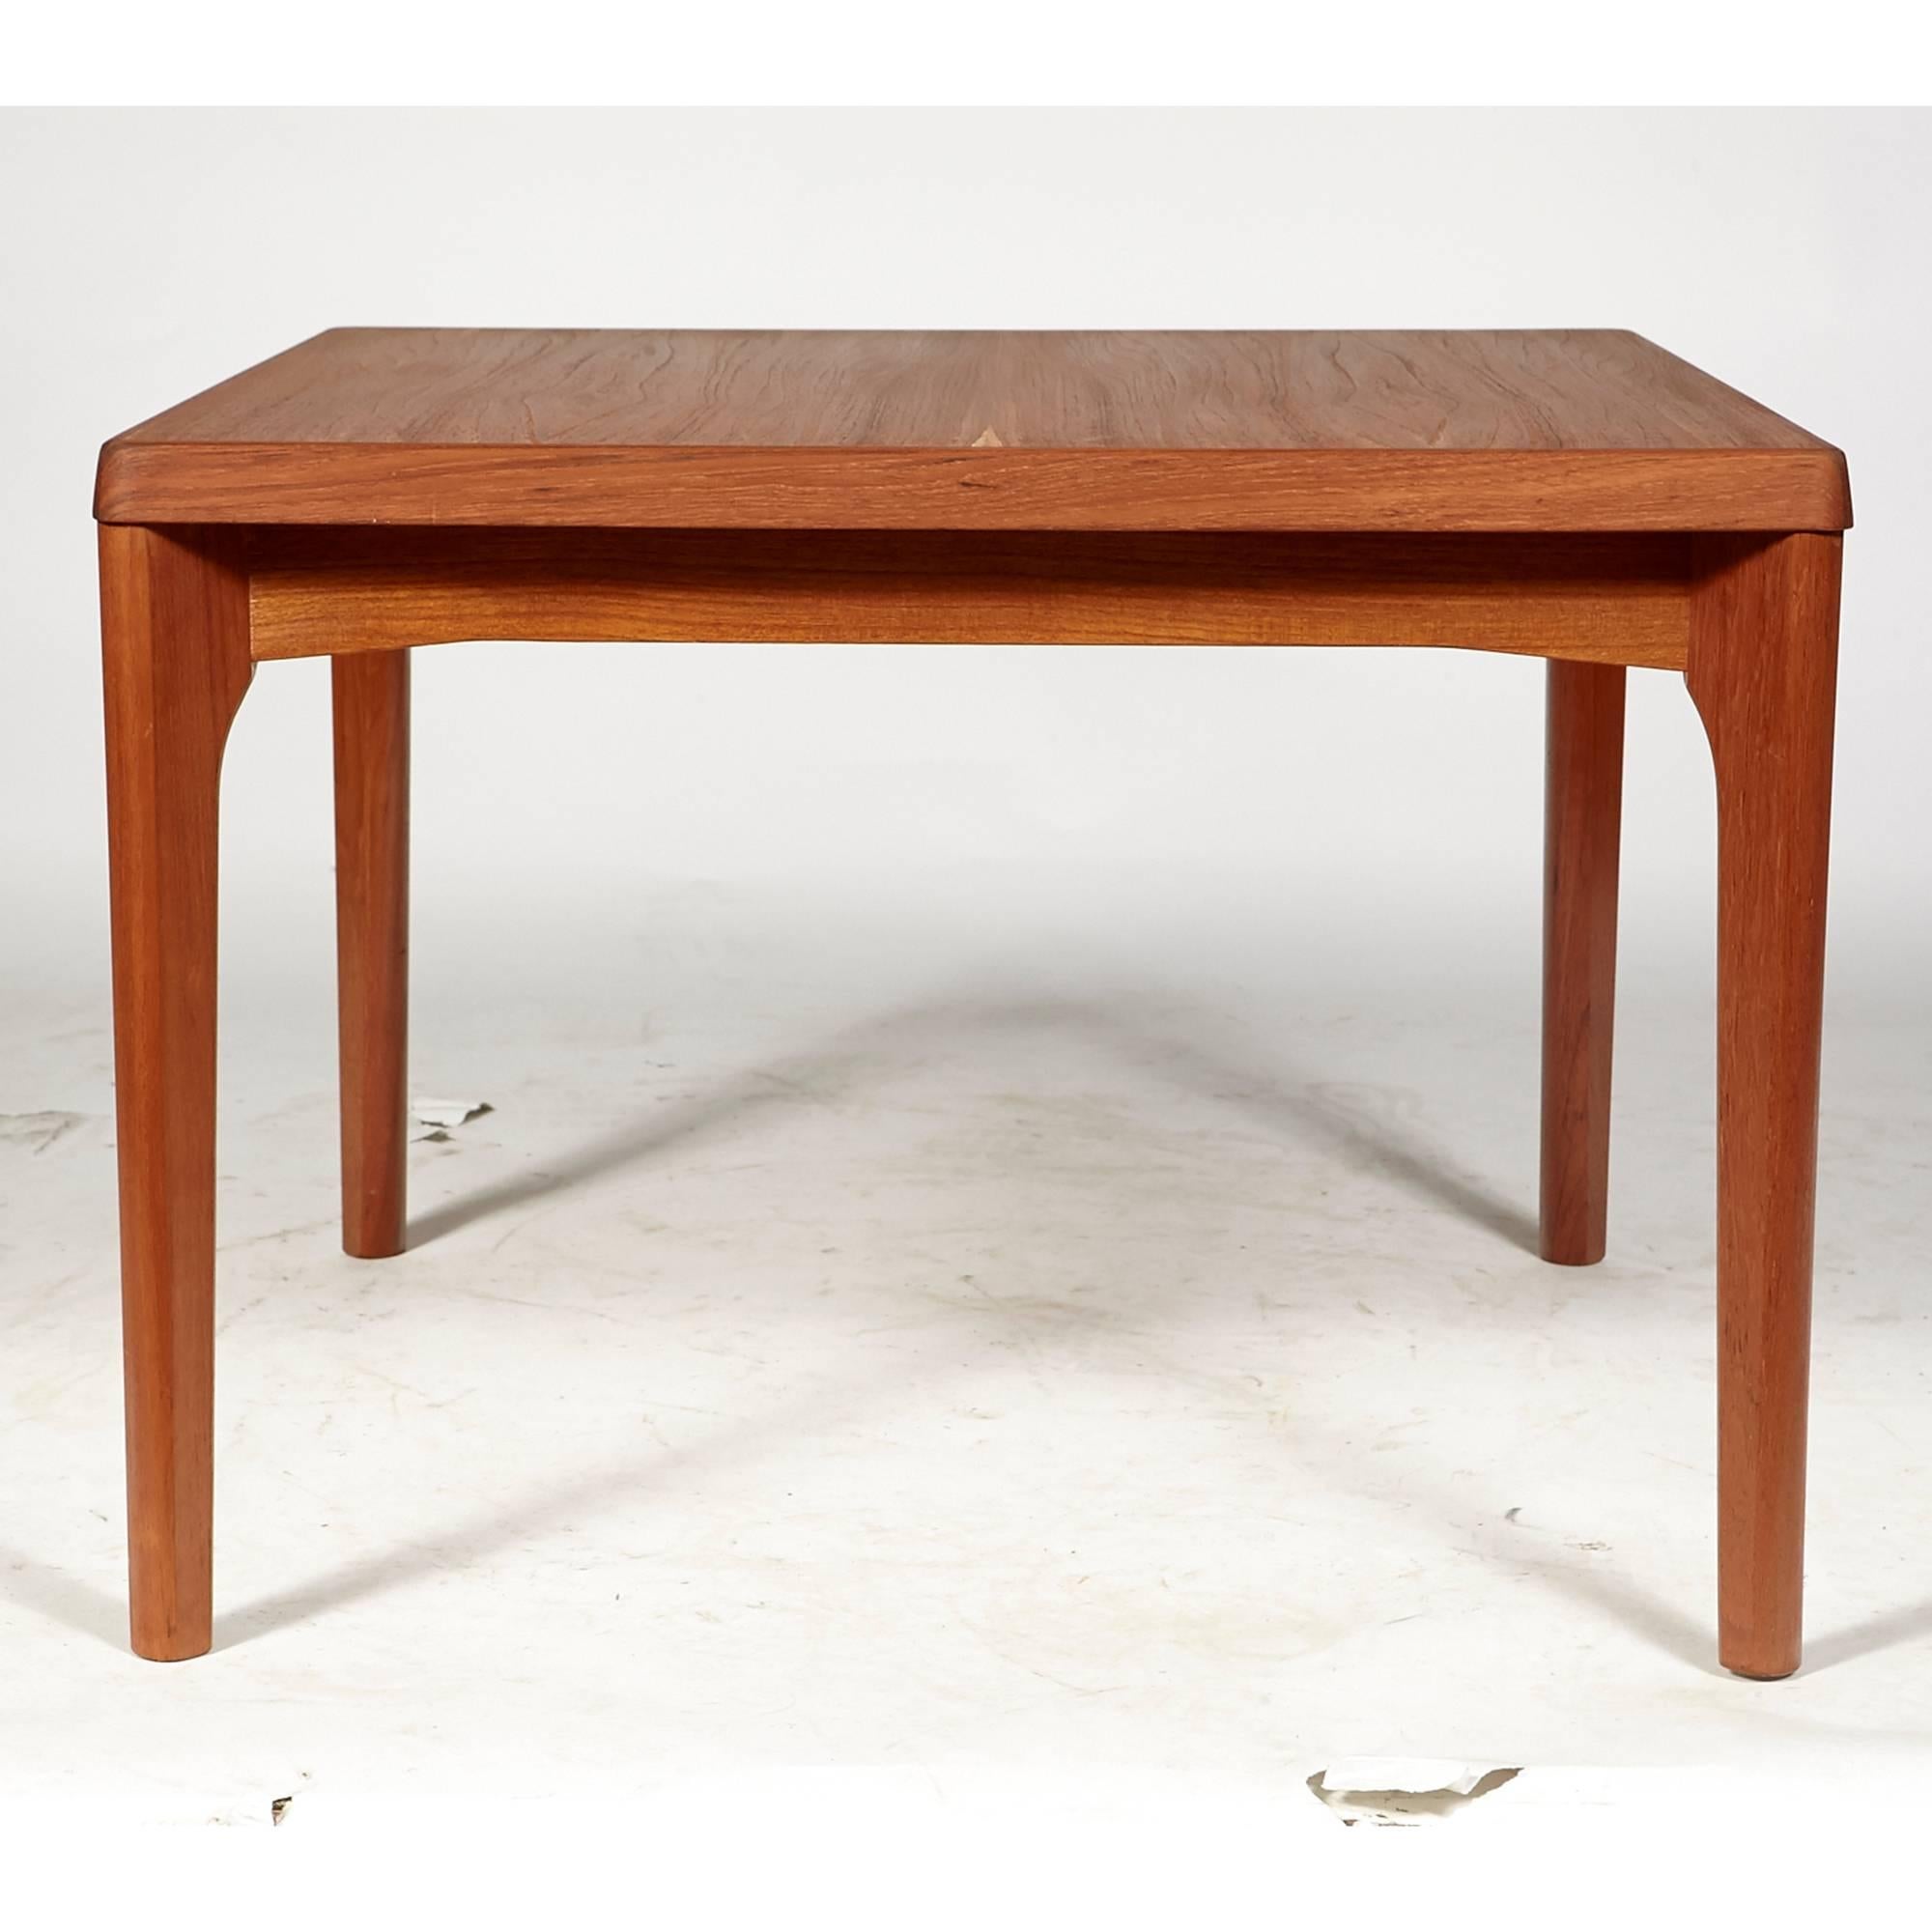 Vintage mid-20th century Danish teak cocktail table designed by Vejle Stole & Mobelfabrik, Denmark, circa 1960s. The table is in refinished condition. Marked underneath.